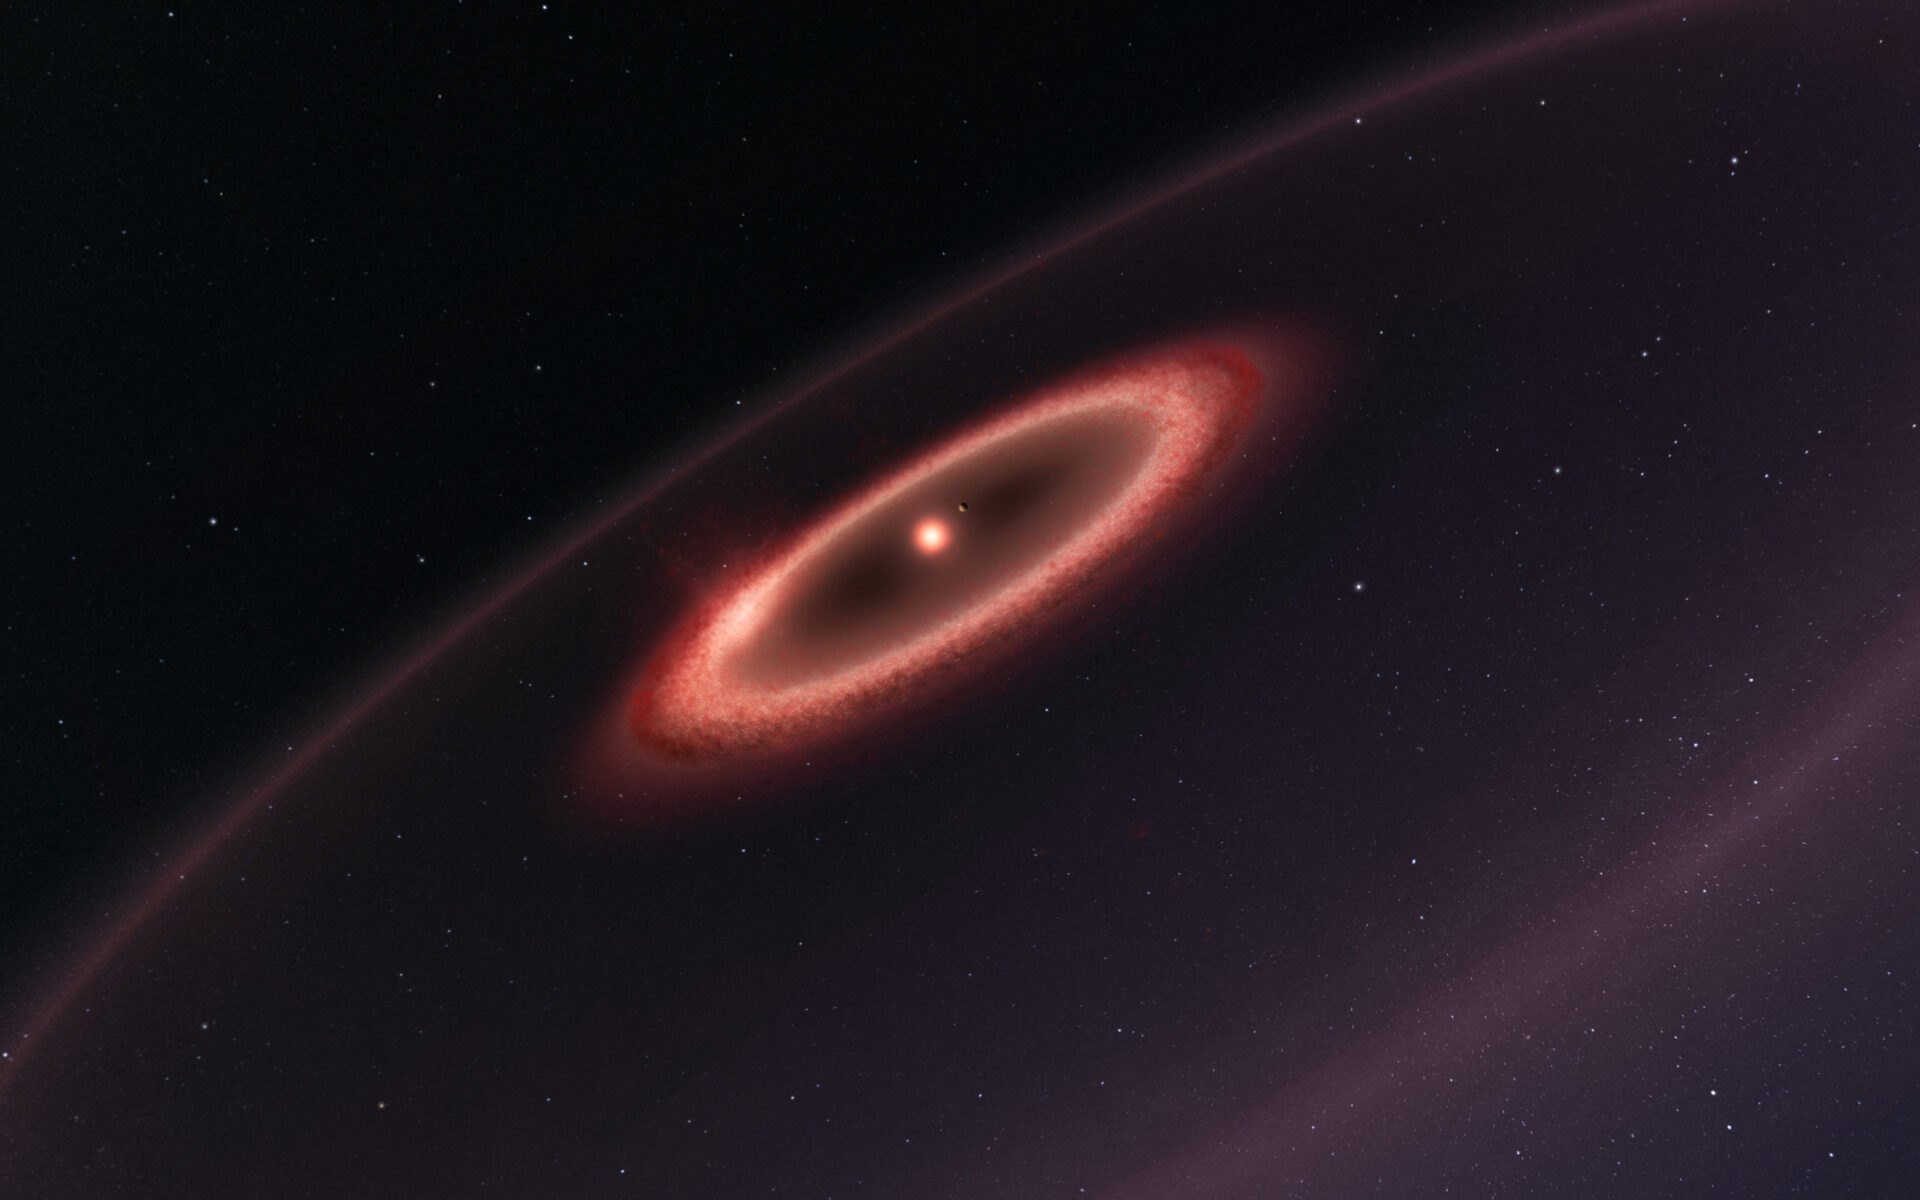 <p>This artist’s impression shows how the newly discovered belts of dust around the closest star to the Solar System, Proxima Centauri, may look. ALMA observations revealed the glow coming from cold dust in a region between one to four times as far from Proxima Centauri as the Earth is from the Sun. The data also hint at the presence of an even cooler outer dust belt and indicate the presence of an elaborate planetary system. These structures are similar to the much larger belts in the Solar System and are also expected to be made from particles of rock and ice that failed to form planets. Note that this sketch is not to scale — to make Proxima b clearly visible it has been shown further from the star and larger than it is in reality. Credit: ESO/M. Kornmesser</p>
